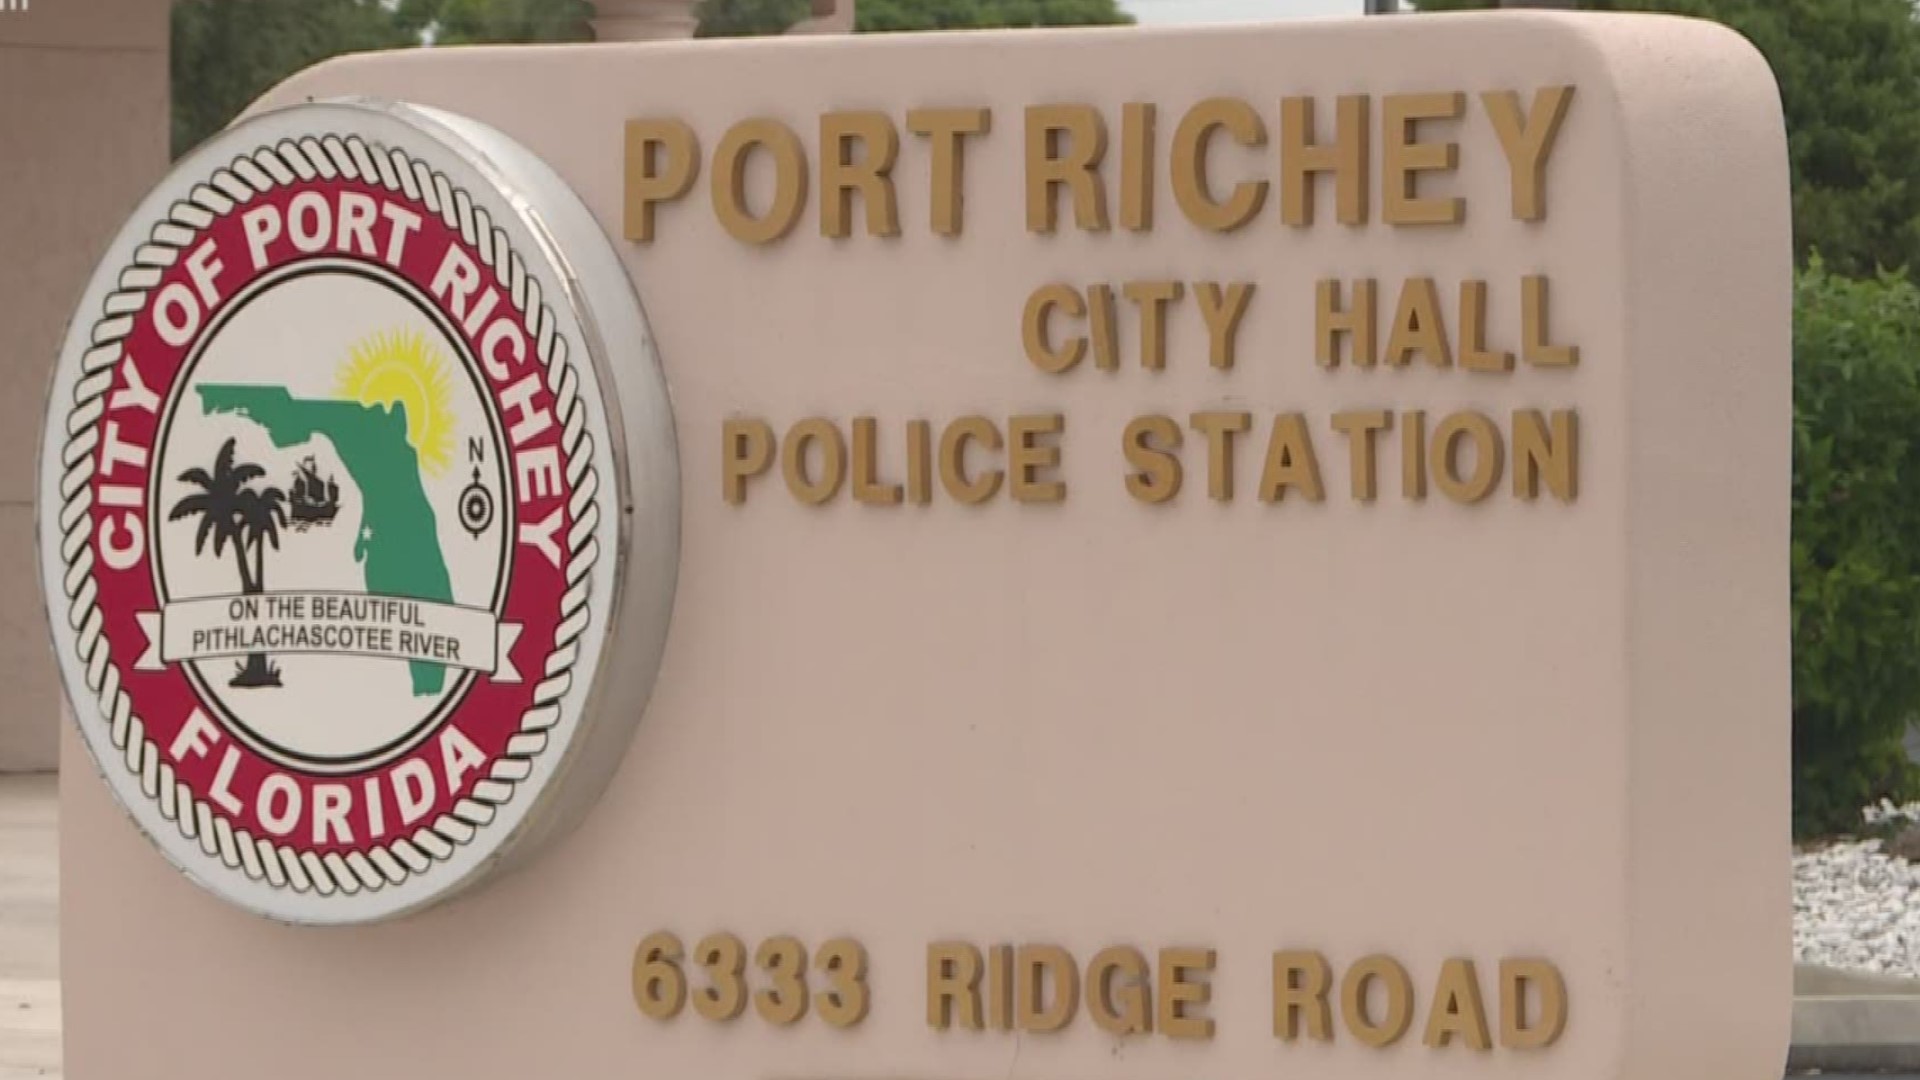 Is Port Richey a city in such disarray that it needs to be absorbed by Pasco County? Or, is the whole idea, as the city manager contends, a money and power grab?